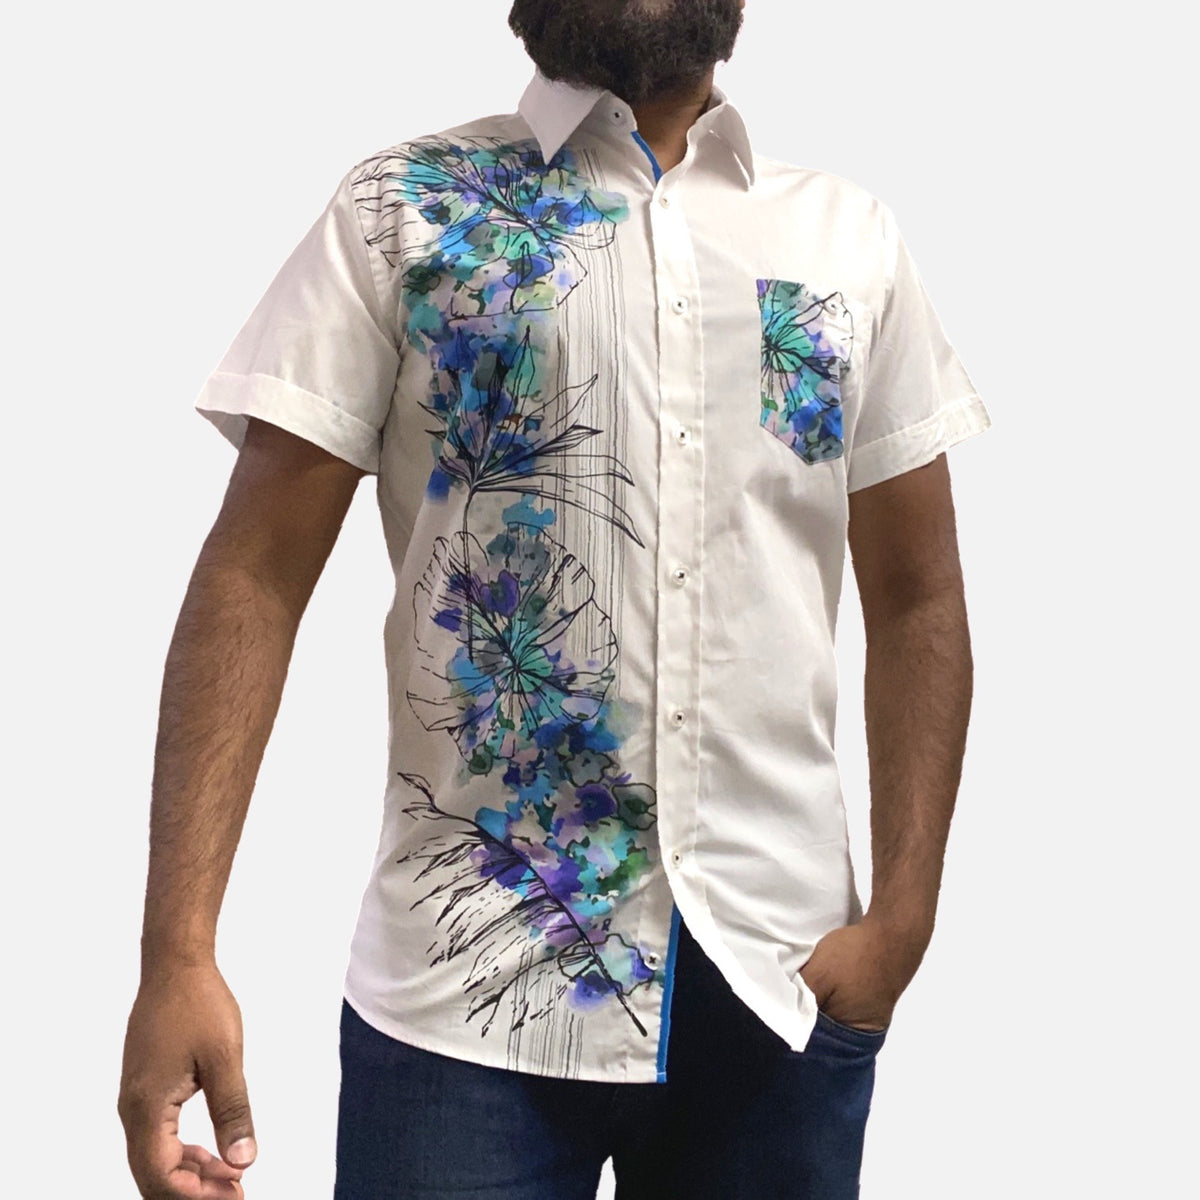 Men's White and Blue Short Sleeve Cotton Button-Up Casual Shirt